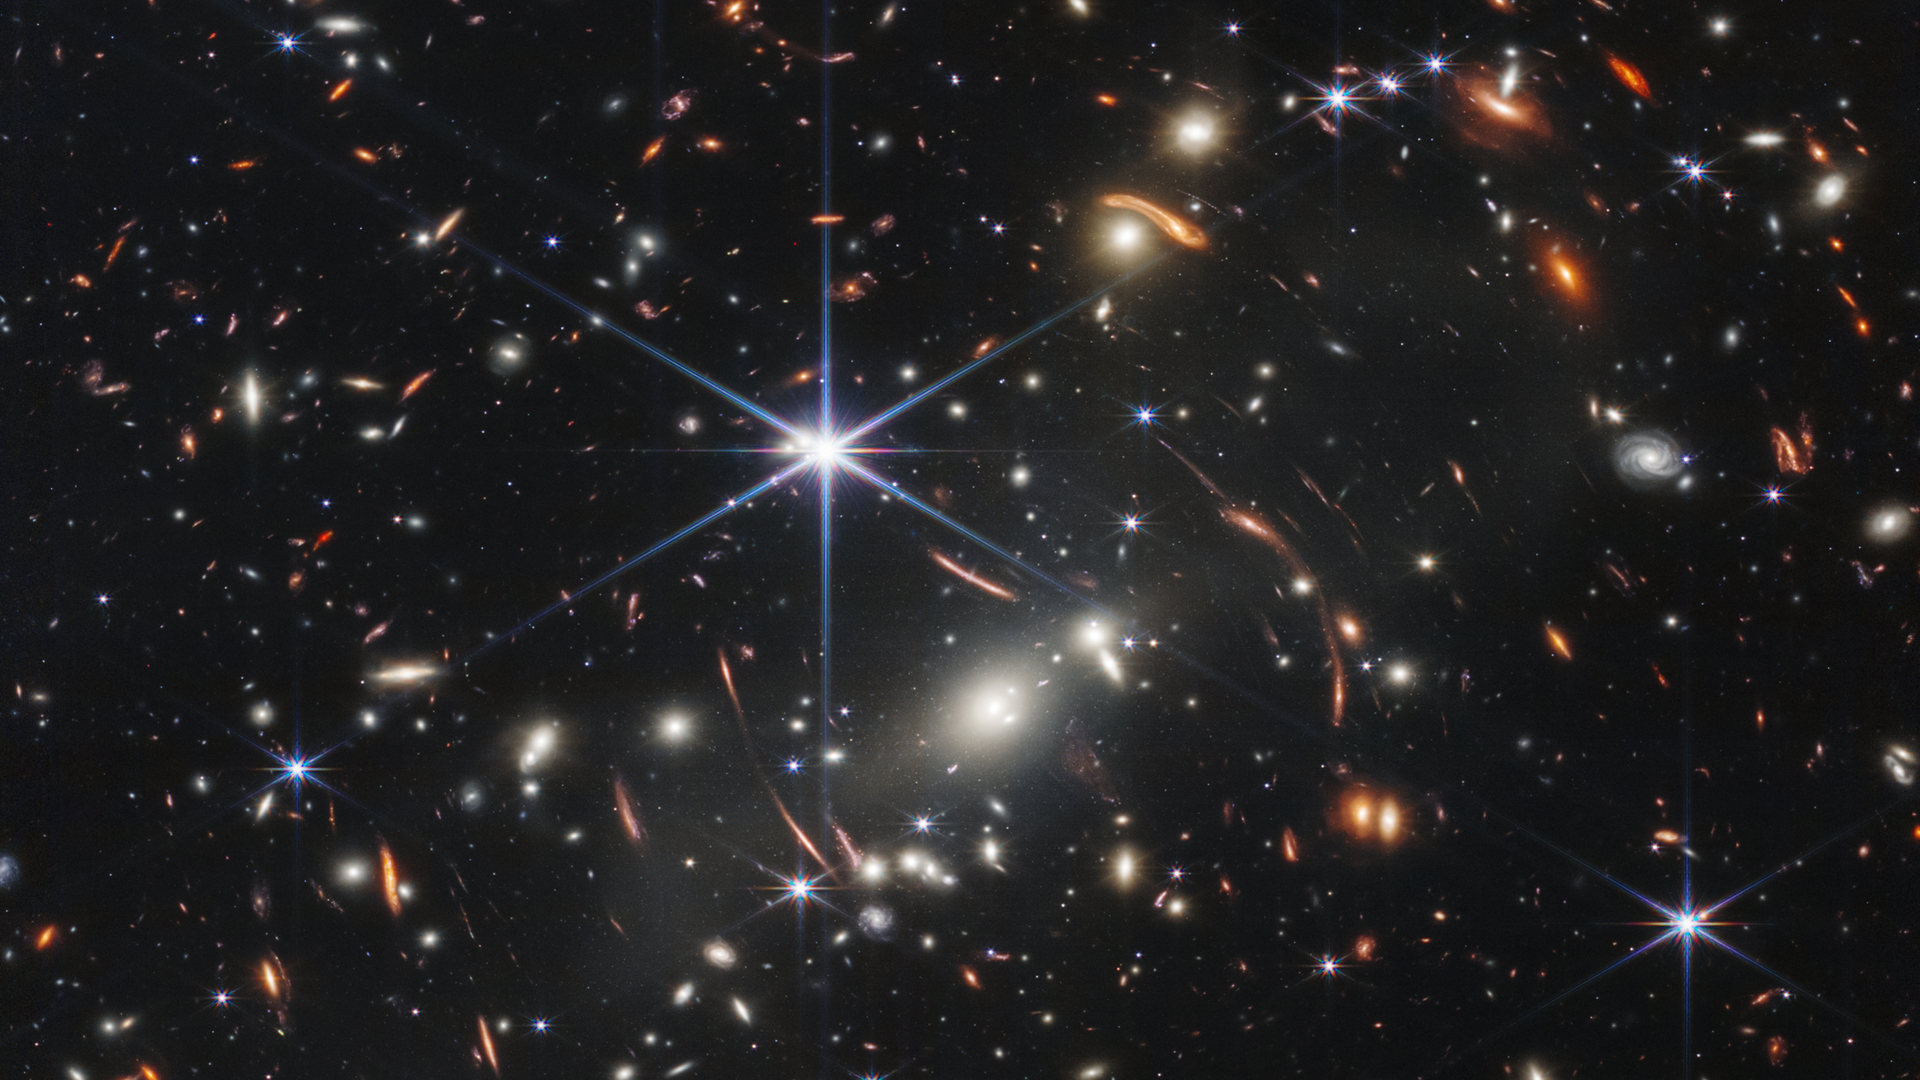 A field of distant galaxies captured by the James Webb Space Telescope.